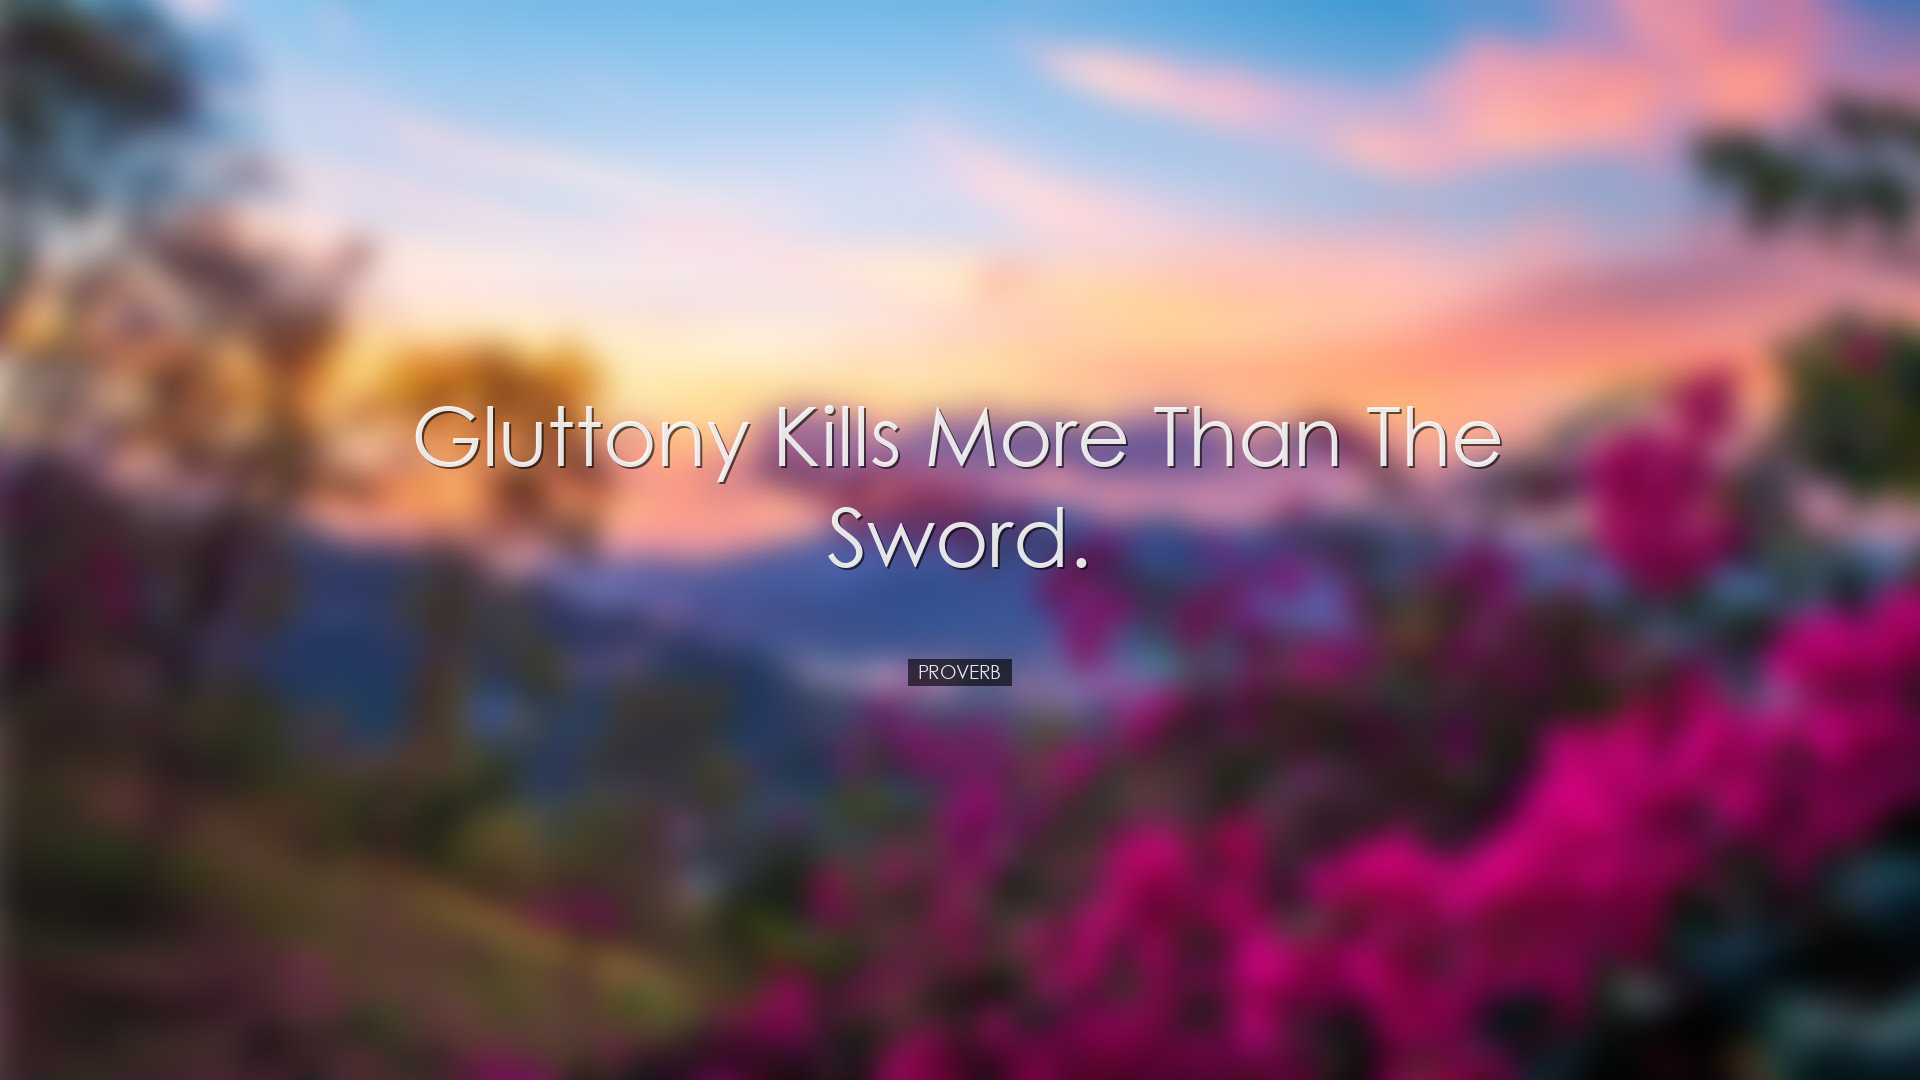 Gluttony kills more than the sword. - Proverb